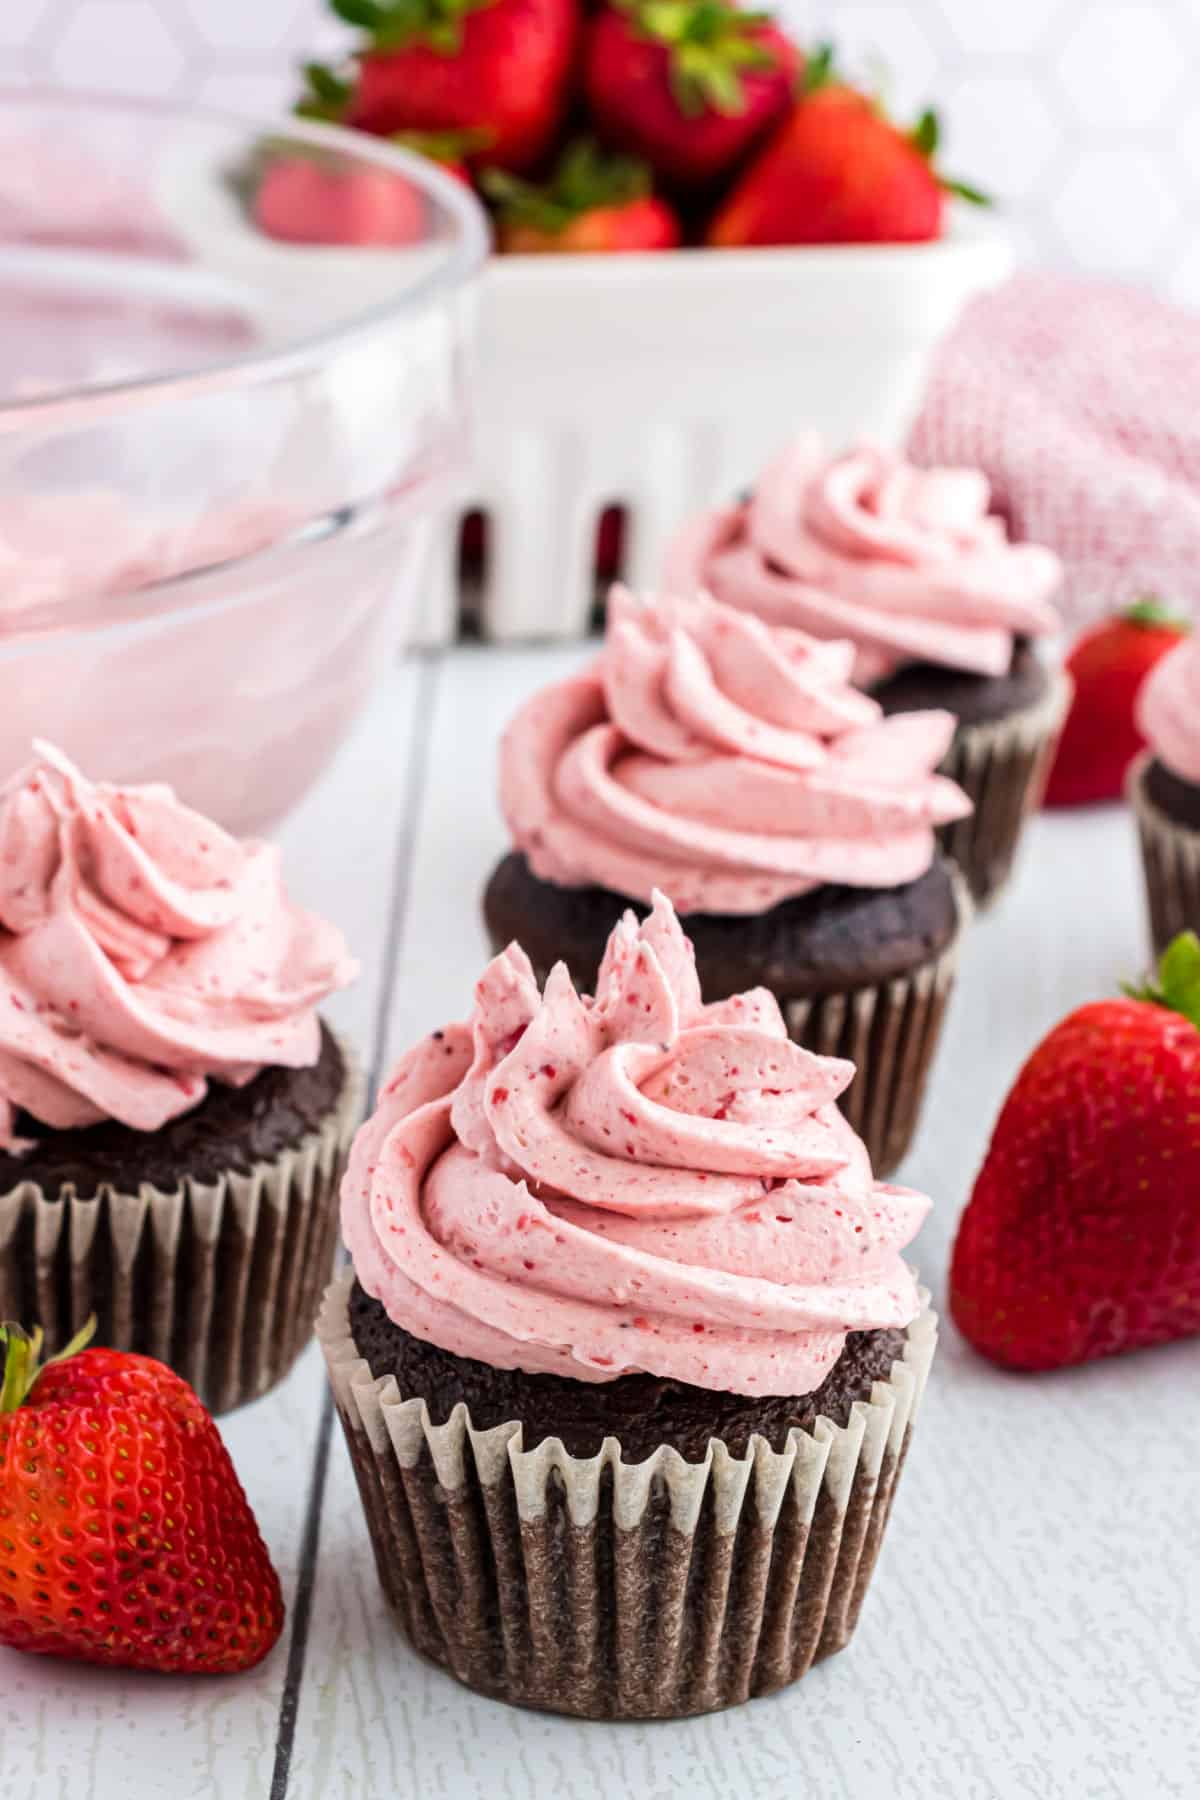 Strawberry frosting swirled on top of chocolate cupcakes.